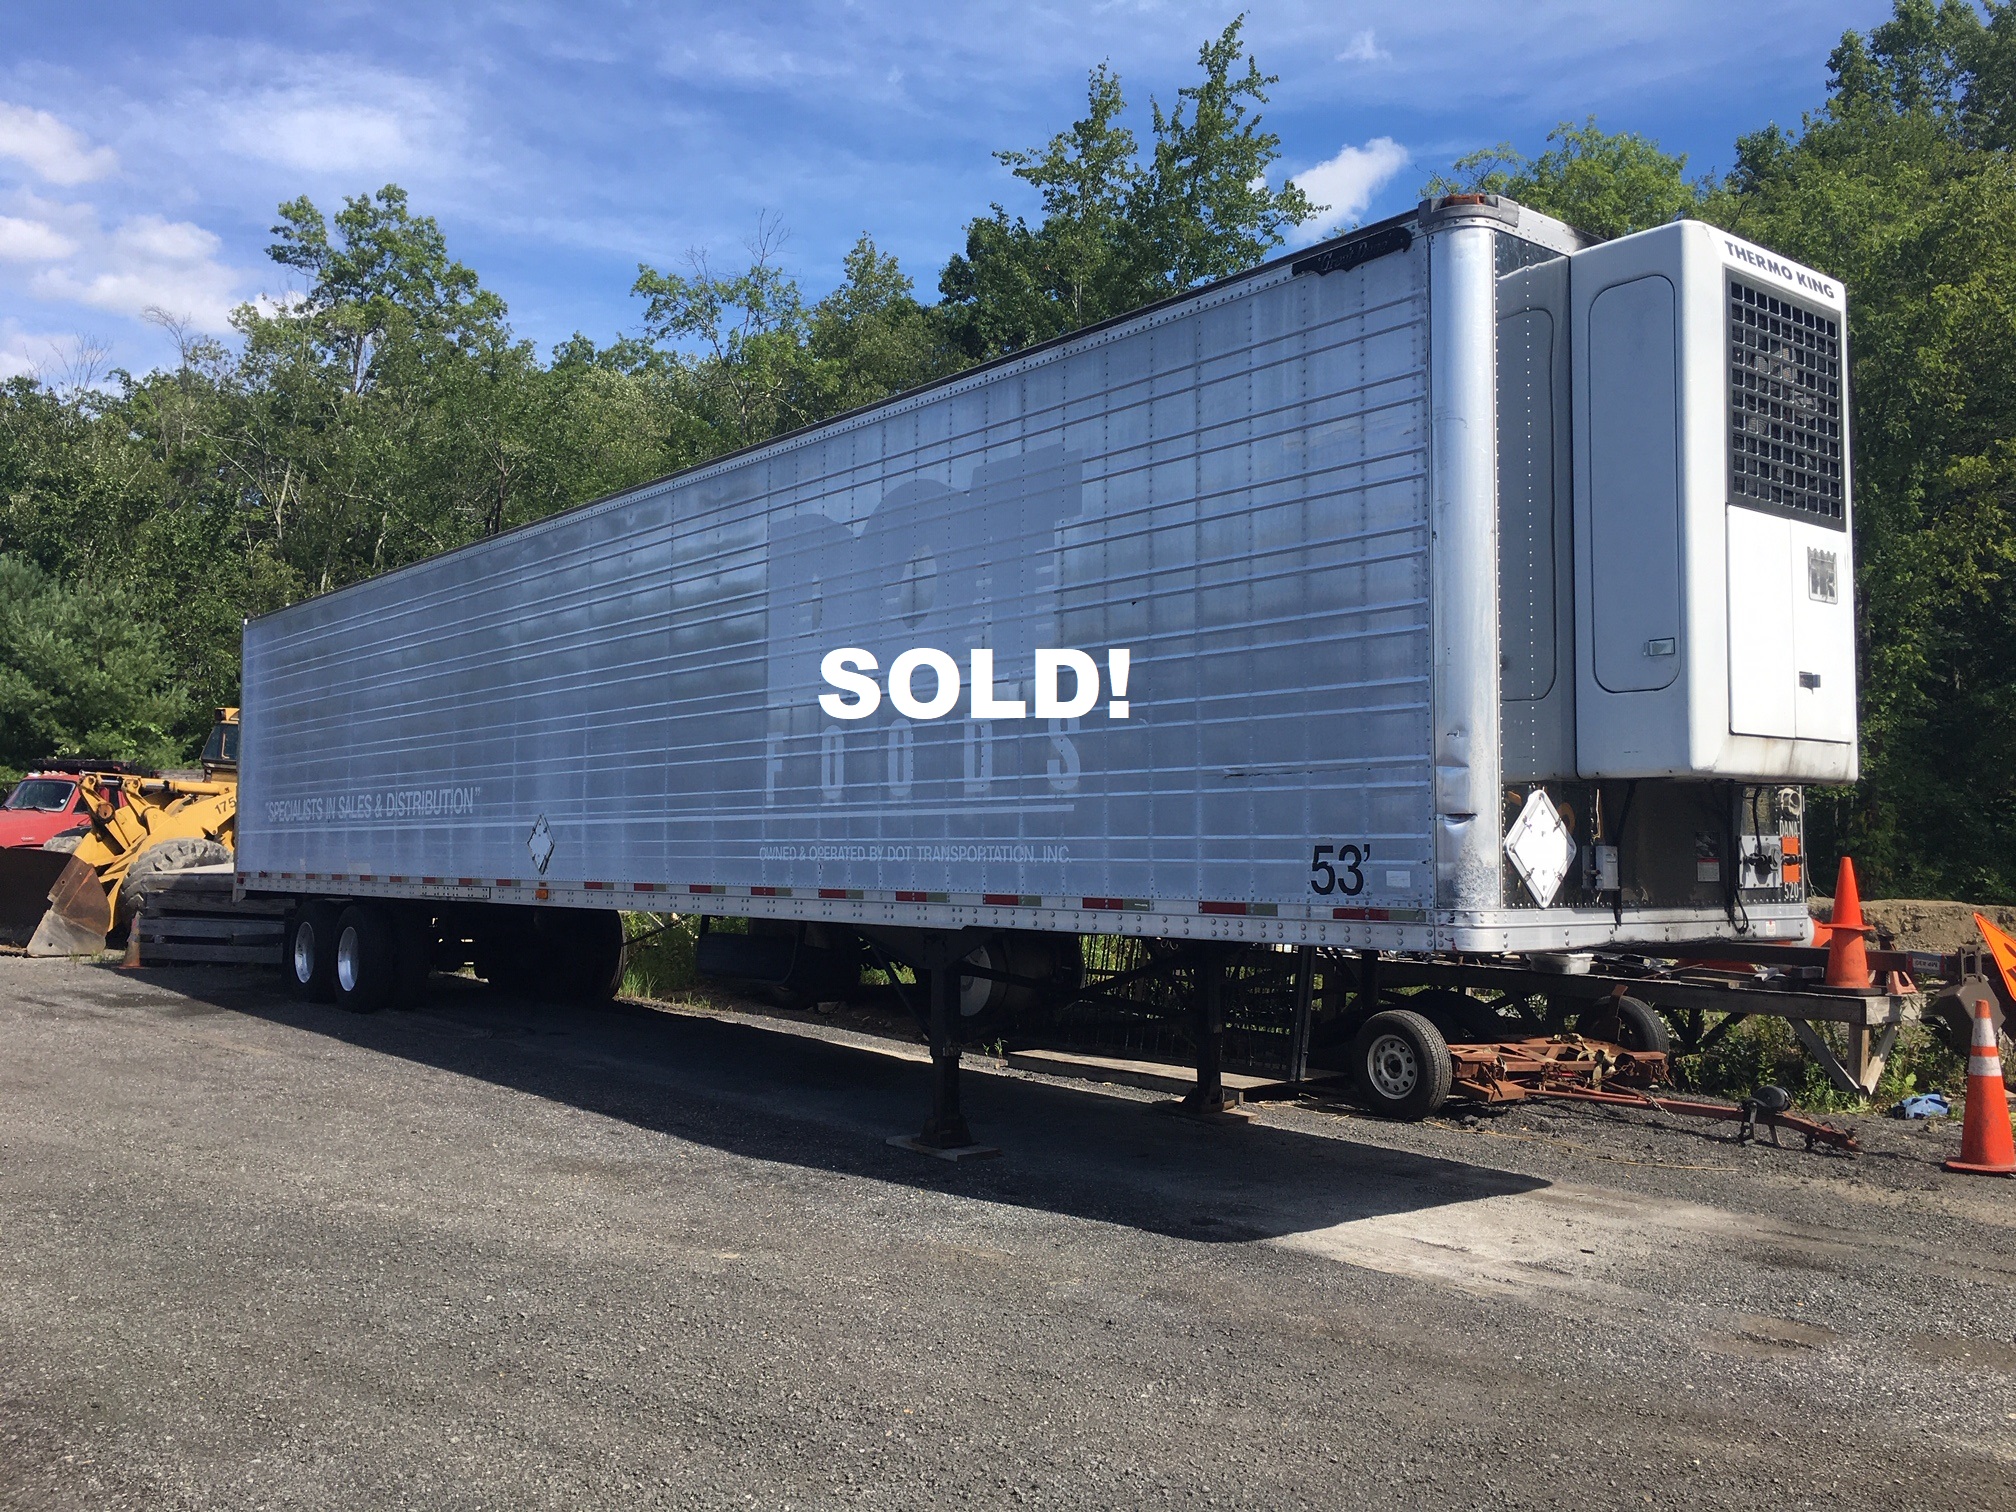 For Sale 53' refrigerated trailer $6'500 SOLD!